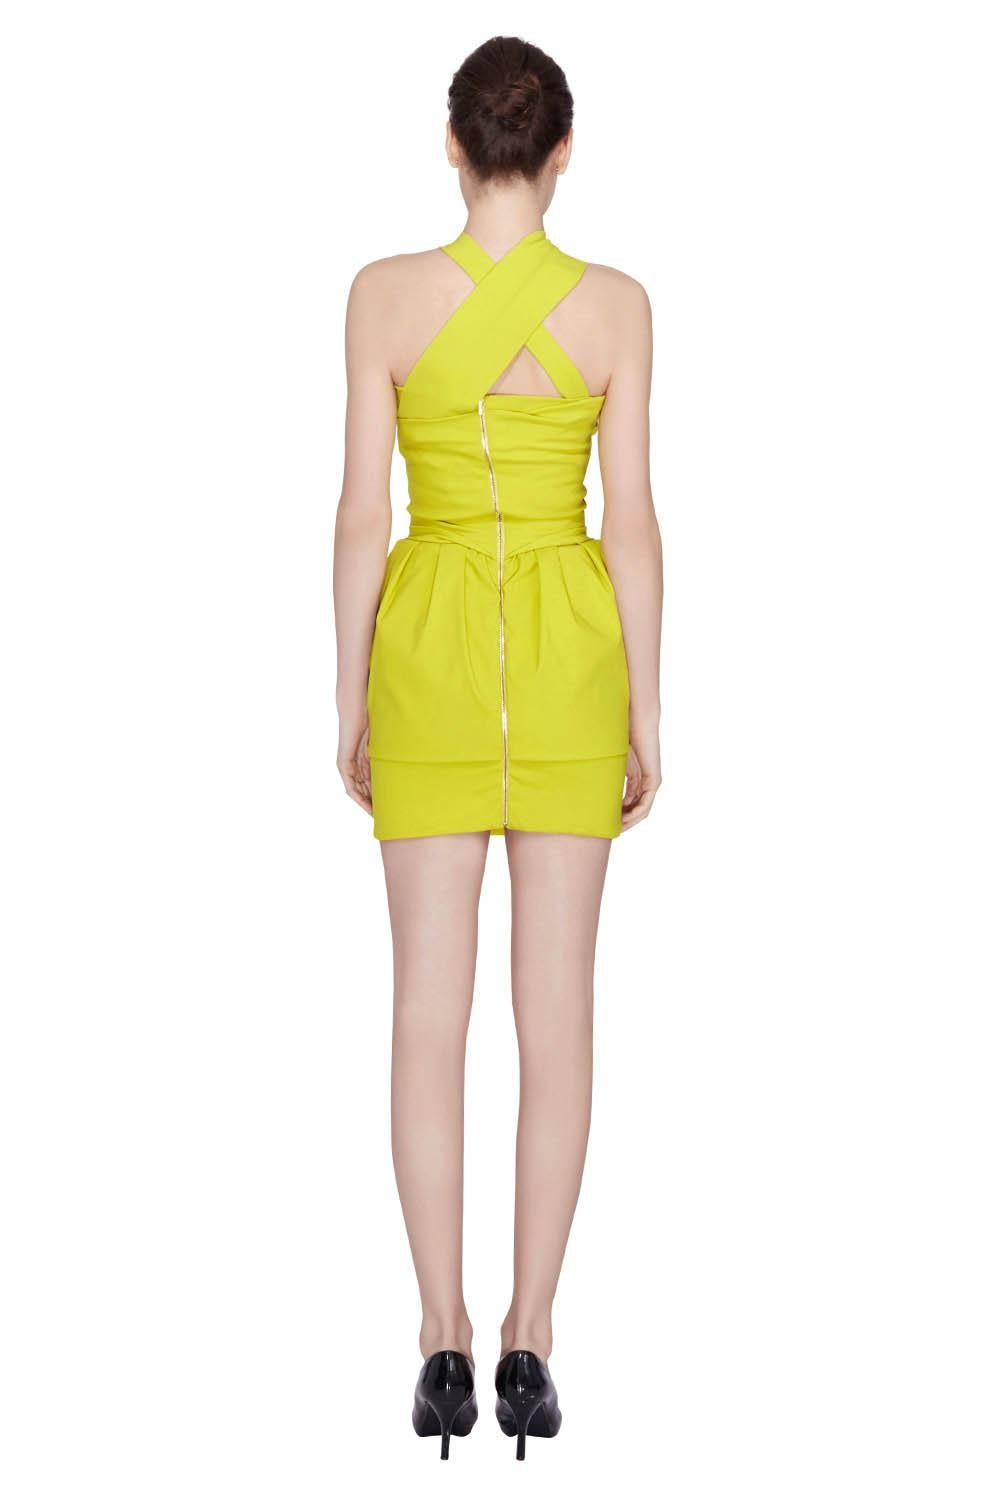 Welcome summer with this fun Preen by Thorton Bregazzi cocktail dress. It is perfect to wear at a beach party or for an evening outing. It features a gorgeous citrus green color, draped bodice and stylish crisscross neckline. Complete your look with